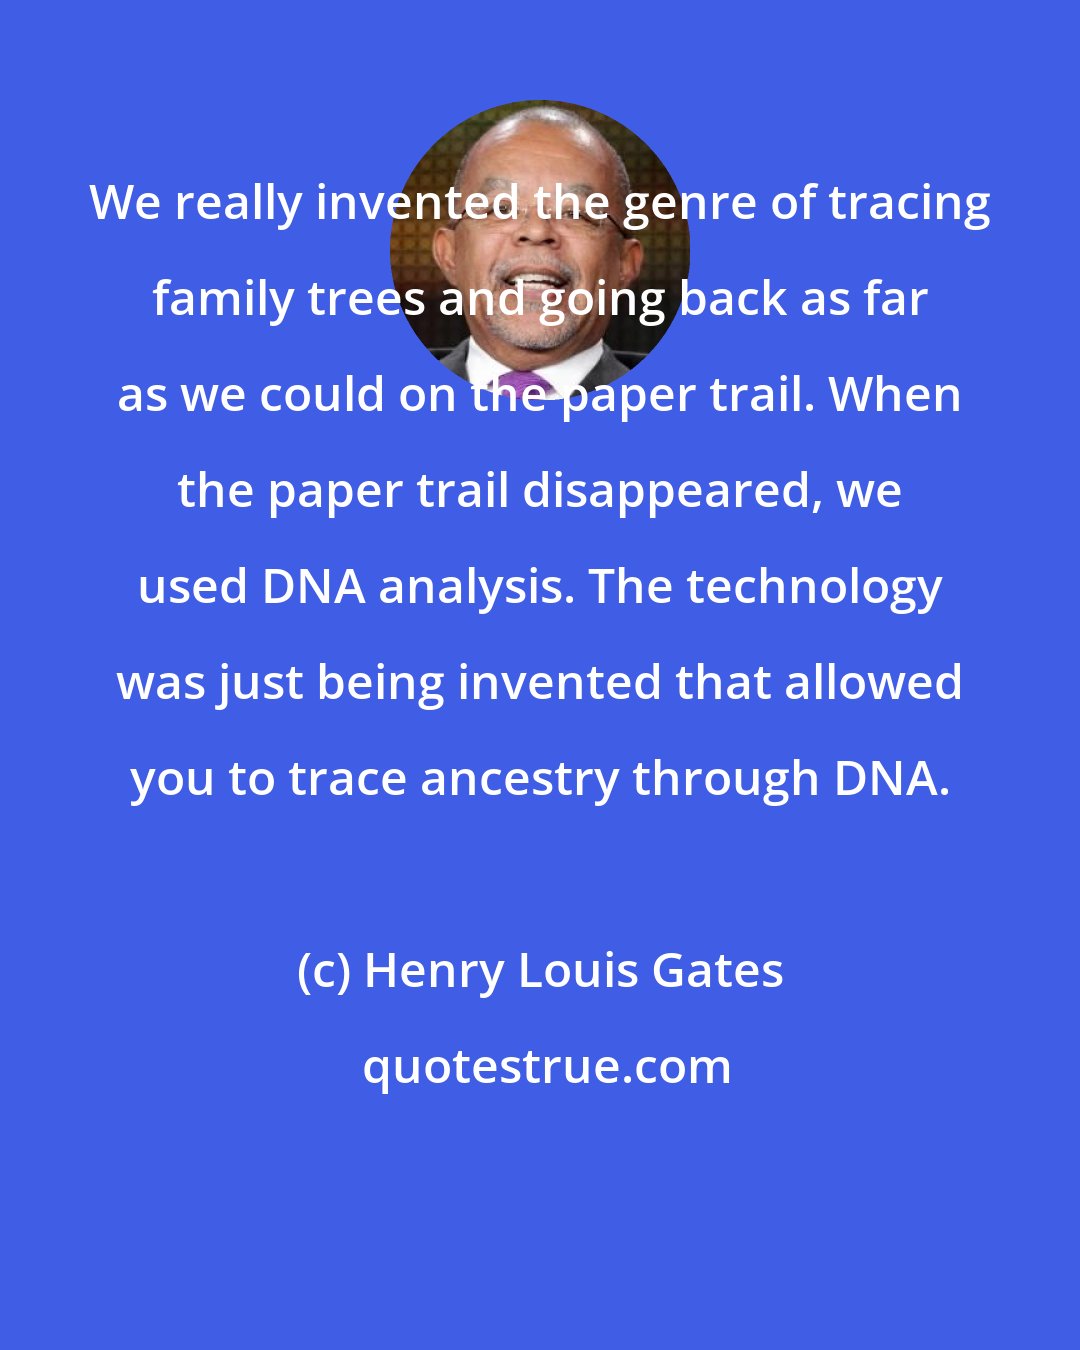 Henry Louis Gates: We really invented the genre of tracing family trees and going back as far as we could on the paper trail. When the paper trail disappeared, we used DNA analysis. The technology was just being invented that allowed you to trace ancestry through DNA.